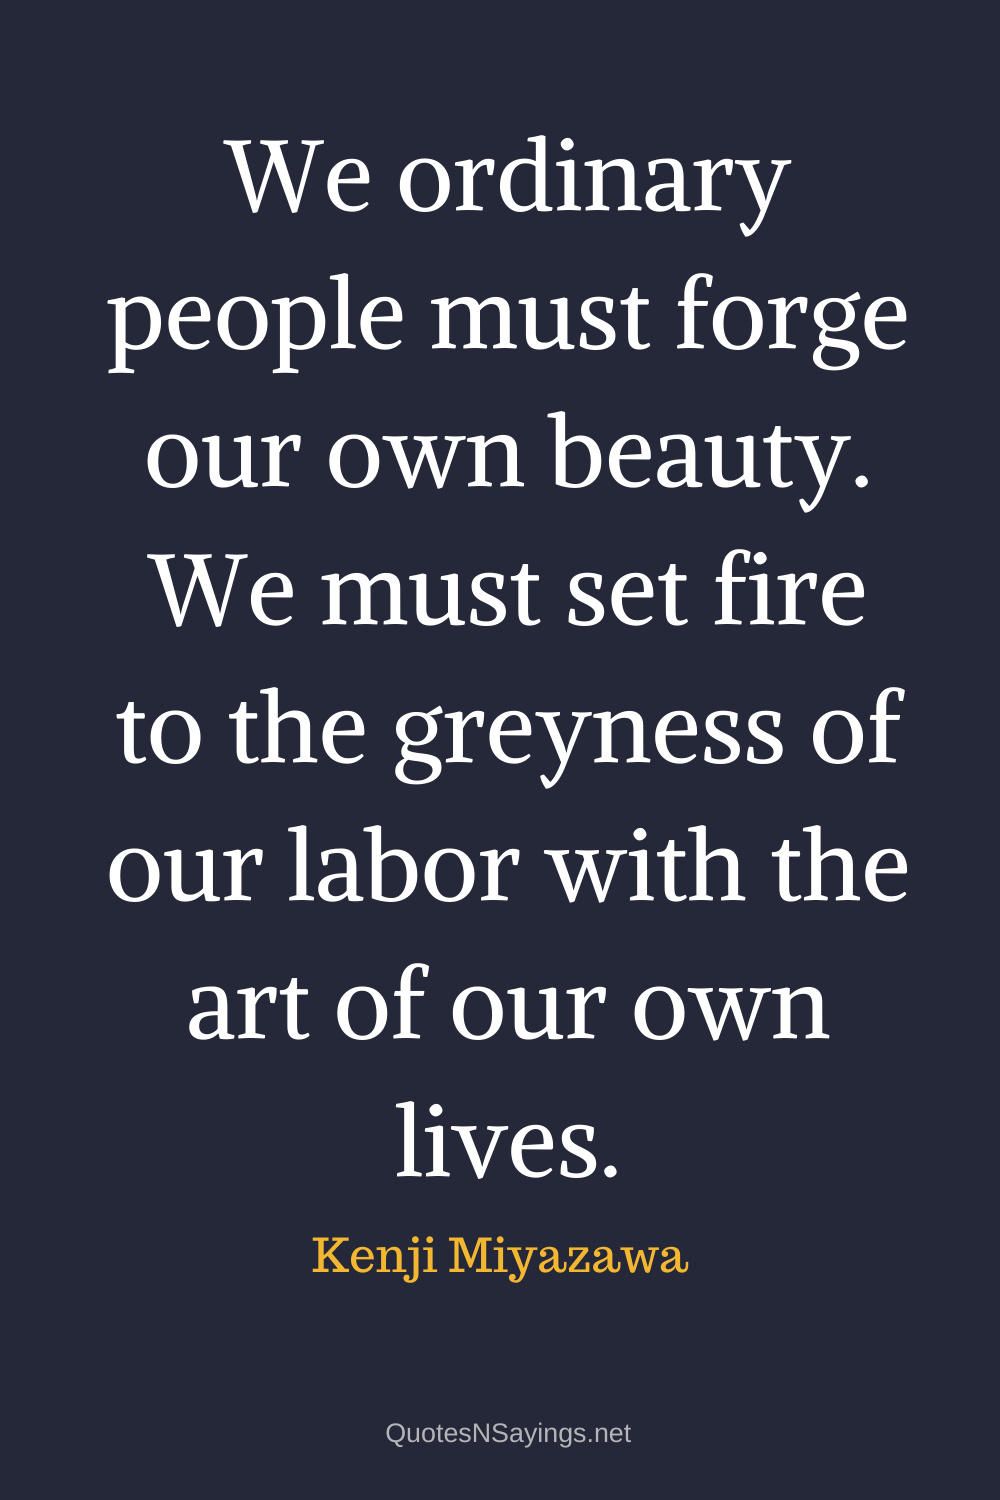 Kenji Miyazawa quote - We ordinary people must forge our own beauty ...